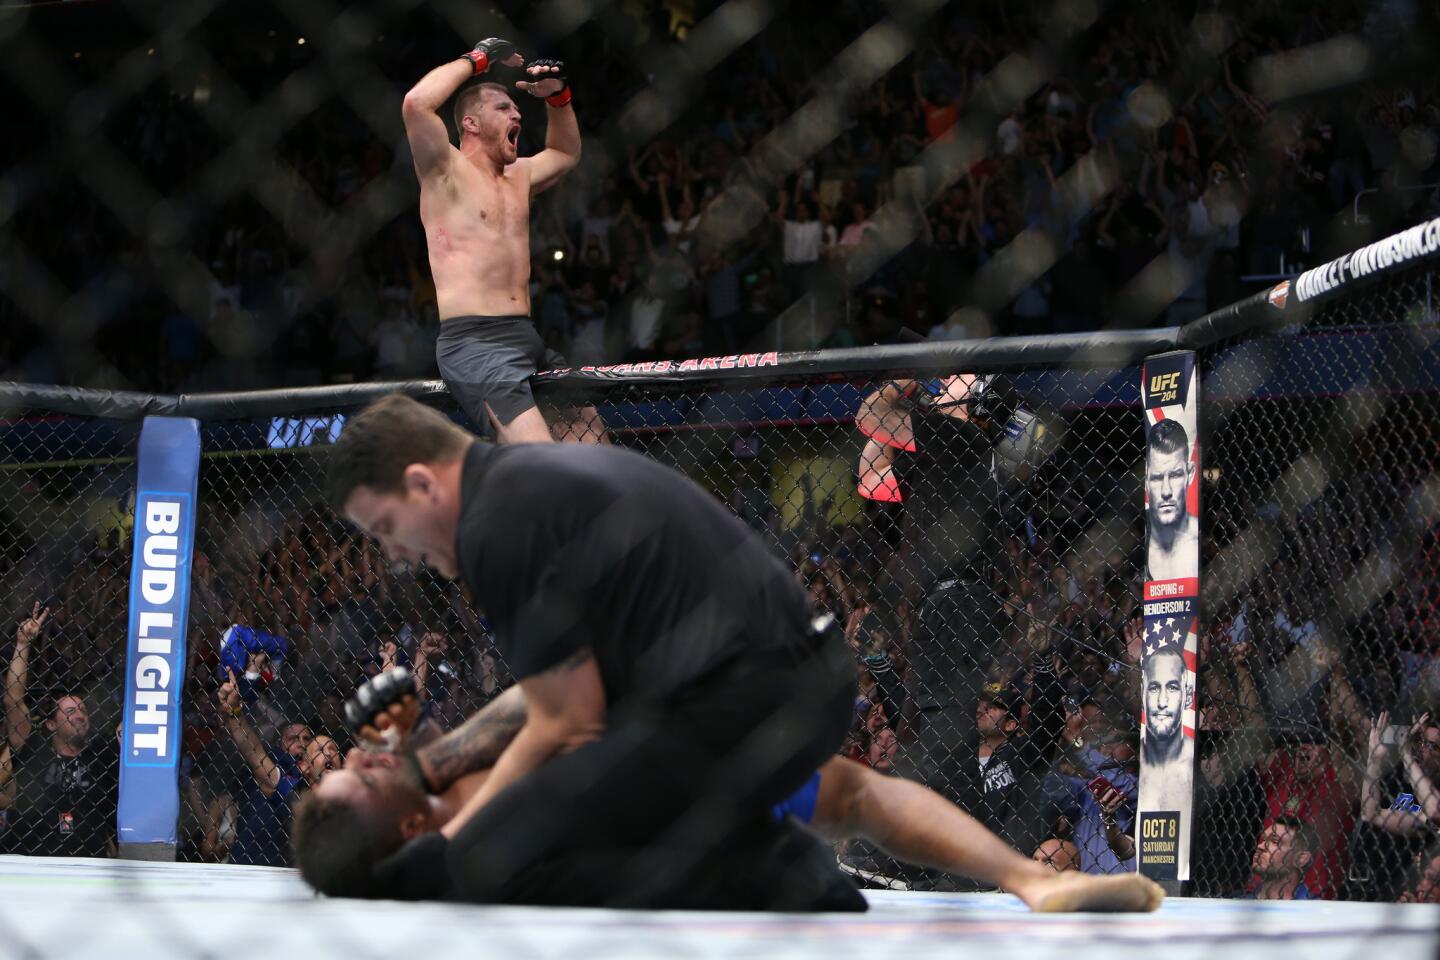 Stipe Miocic celebrates his victory over Alistair Overeem on Sept. 10 at UFC 203 in Cleveland.